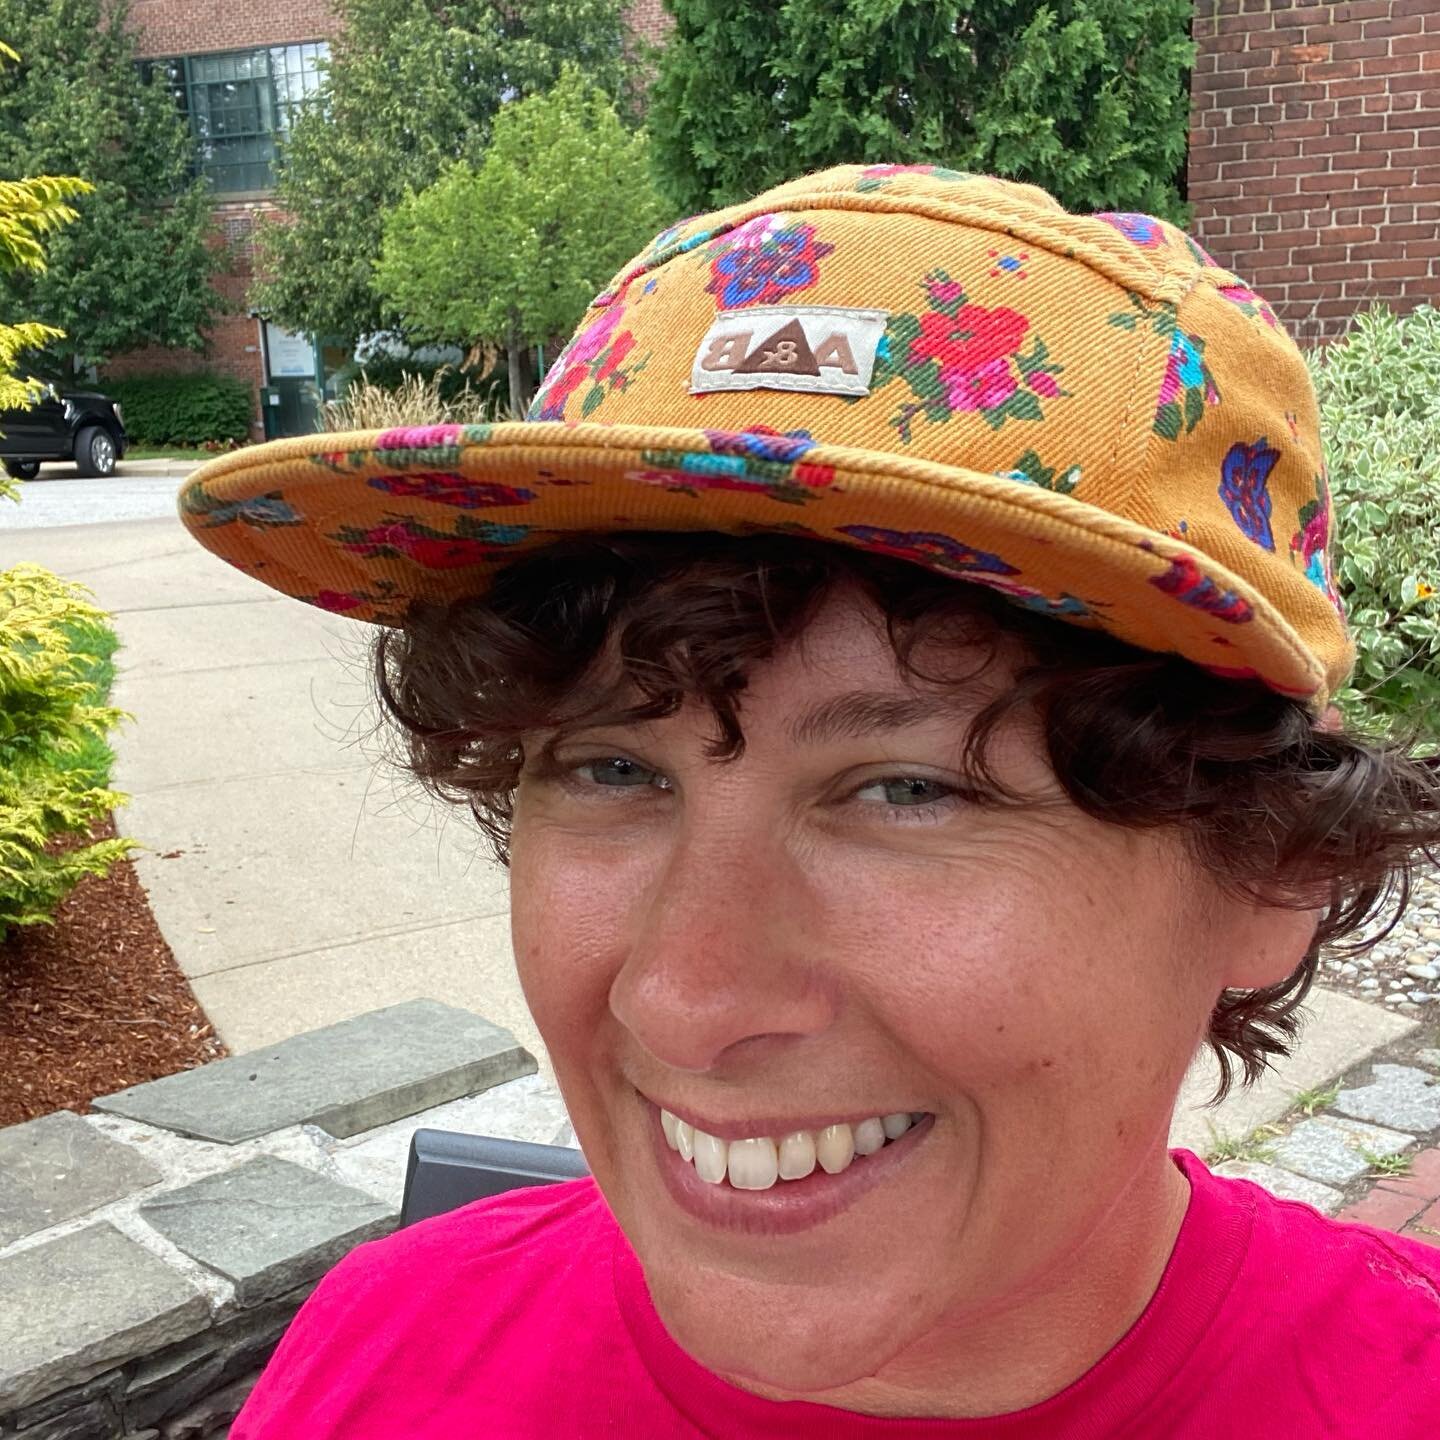 Brought out my favorite hat to @sevenstarsbakery today. Hat number 180. Dam I love this fabric. Wish I had more of it. #fabrichoarder #apenbird #notsweatshopshit